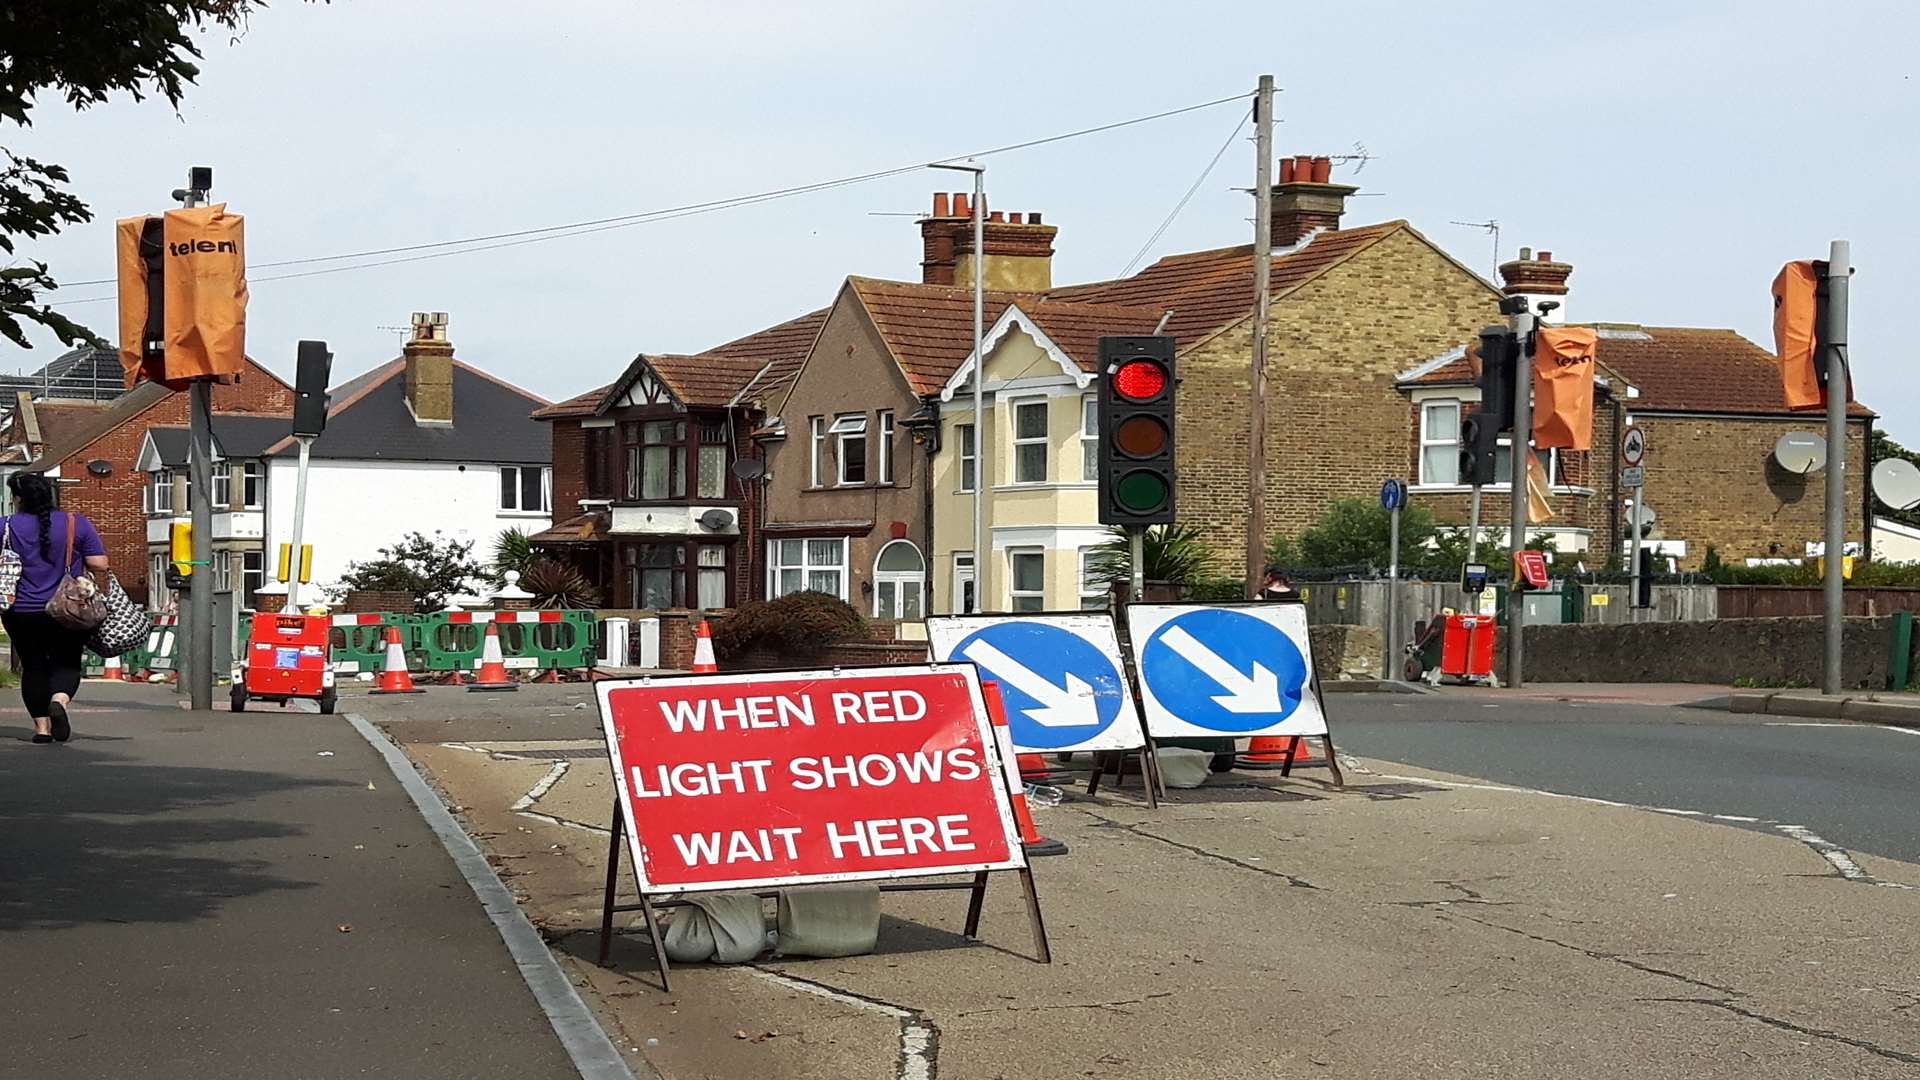 Delays built up when these traffic lights stuck on red.